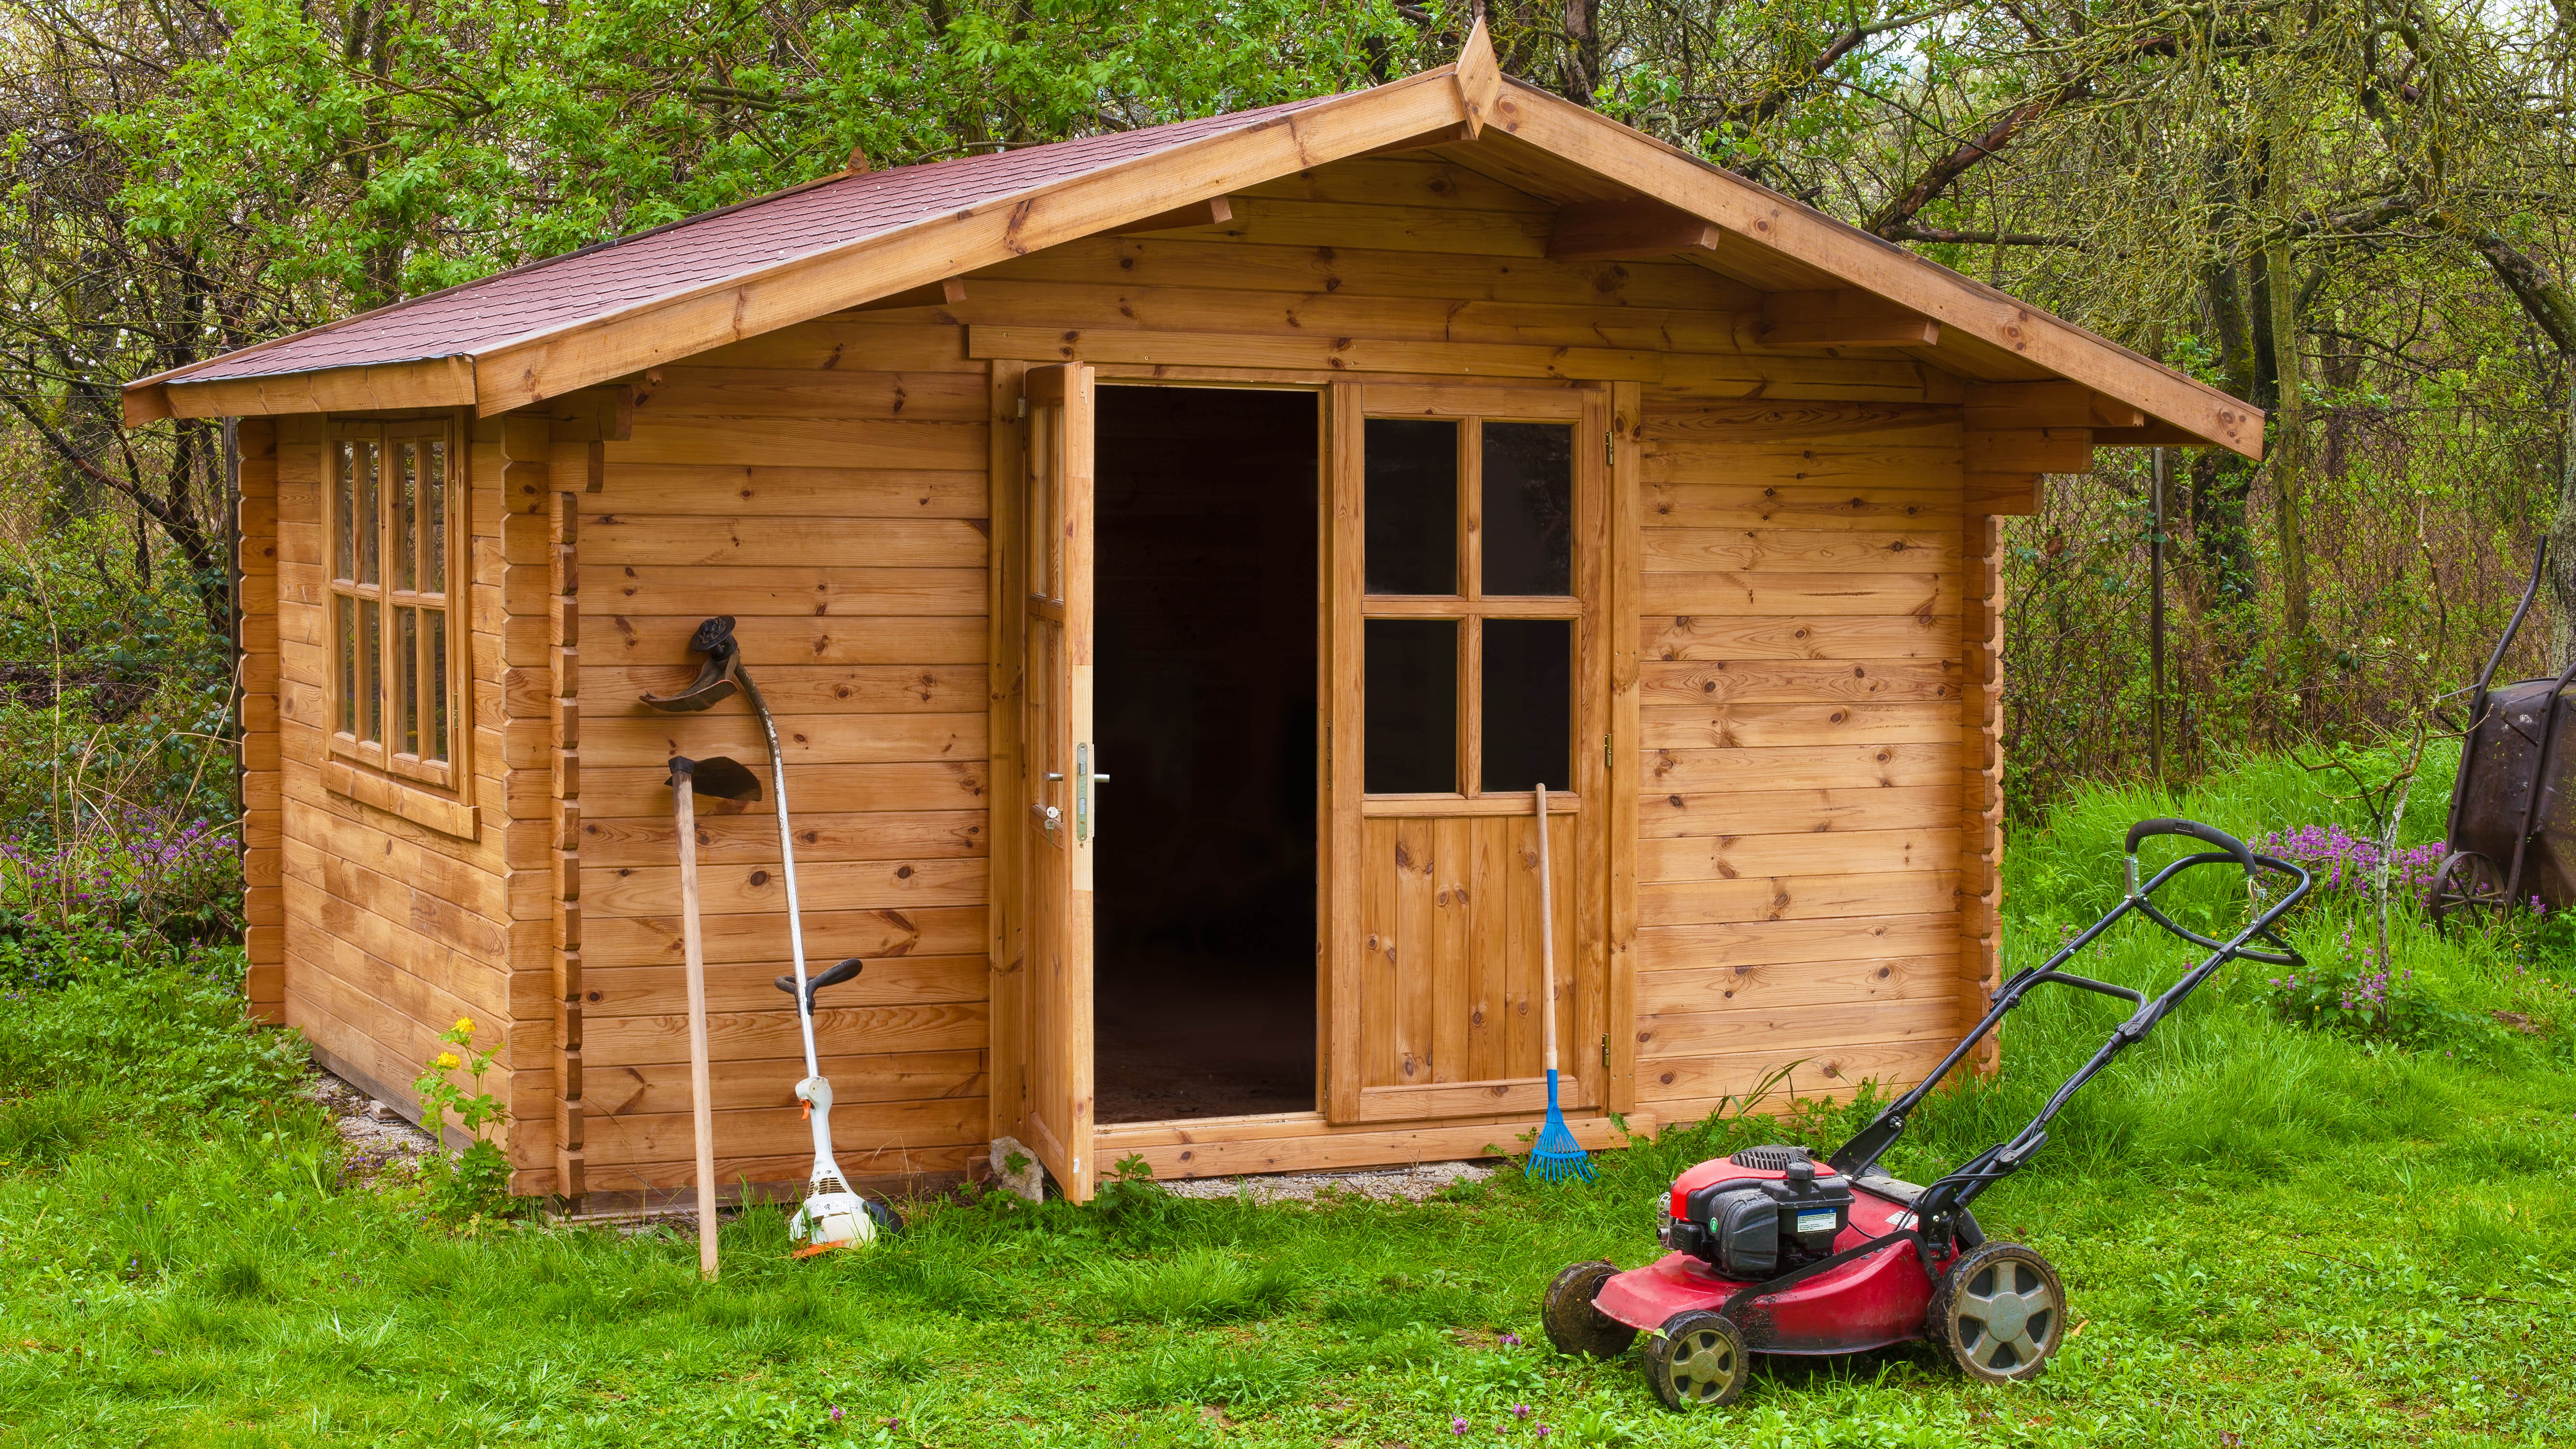 Shed with a lawn mower outside it